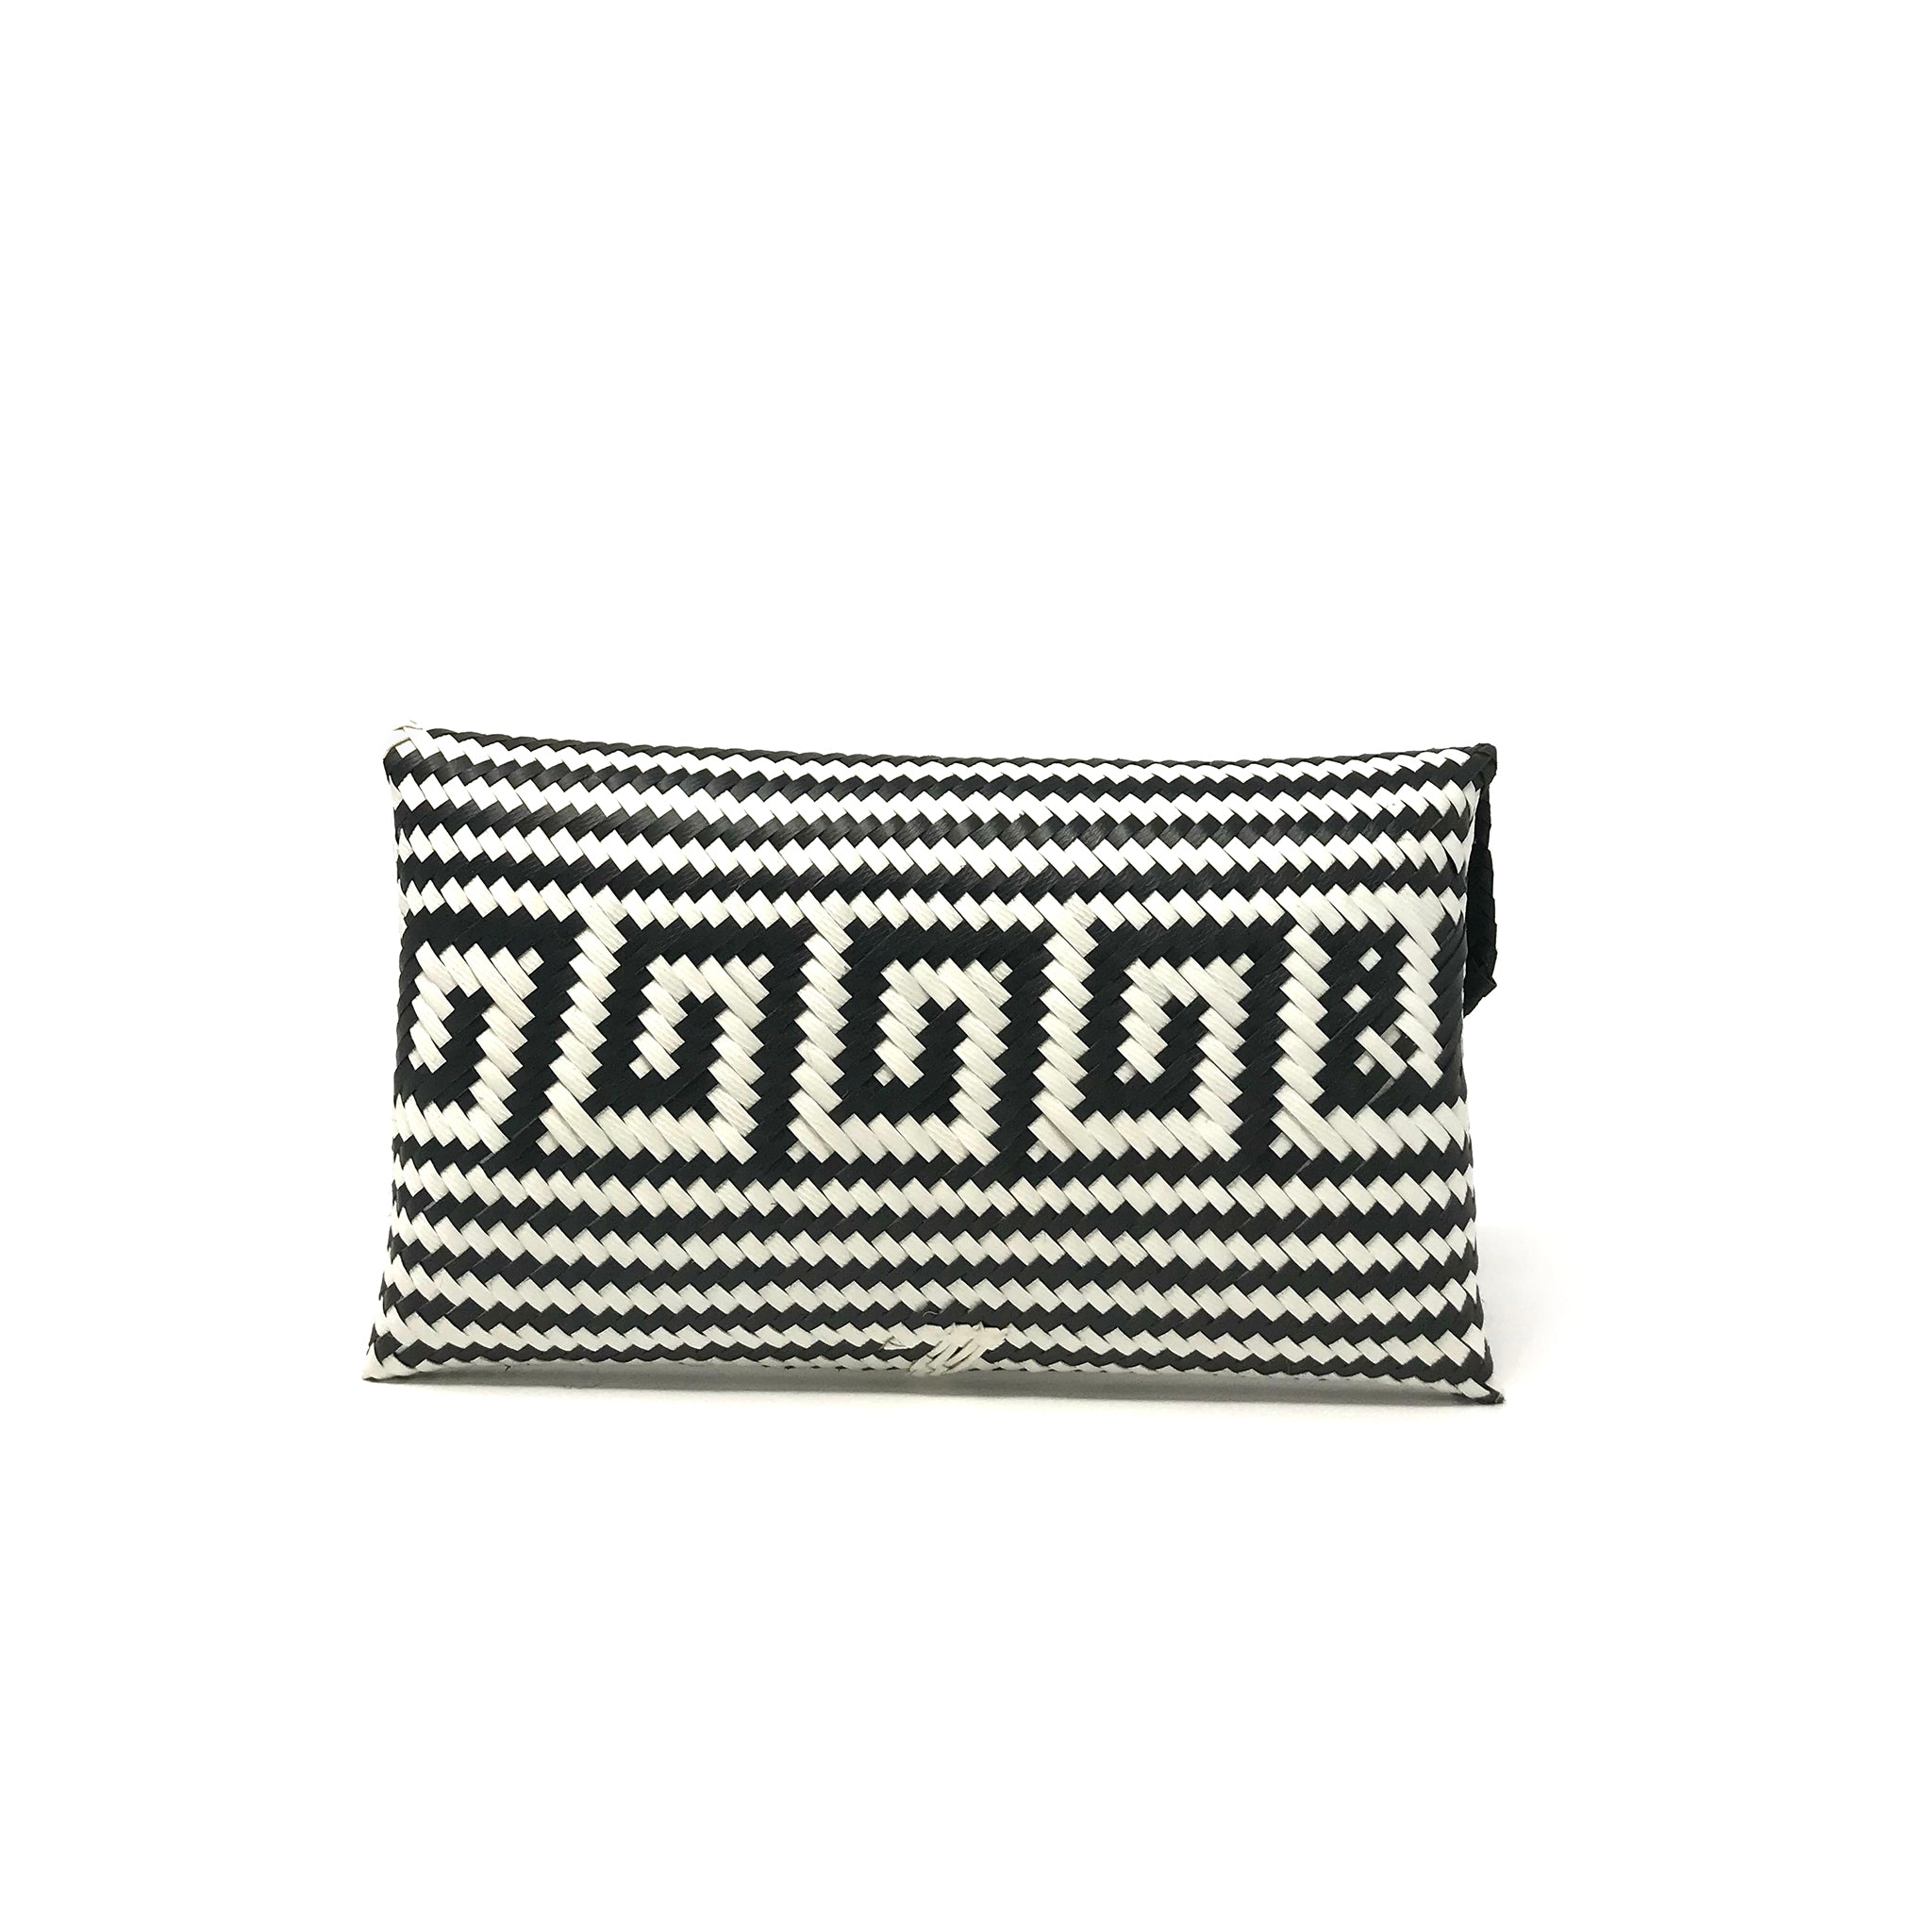 Black and white clutch facing backwards.